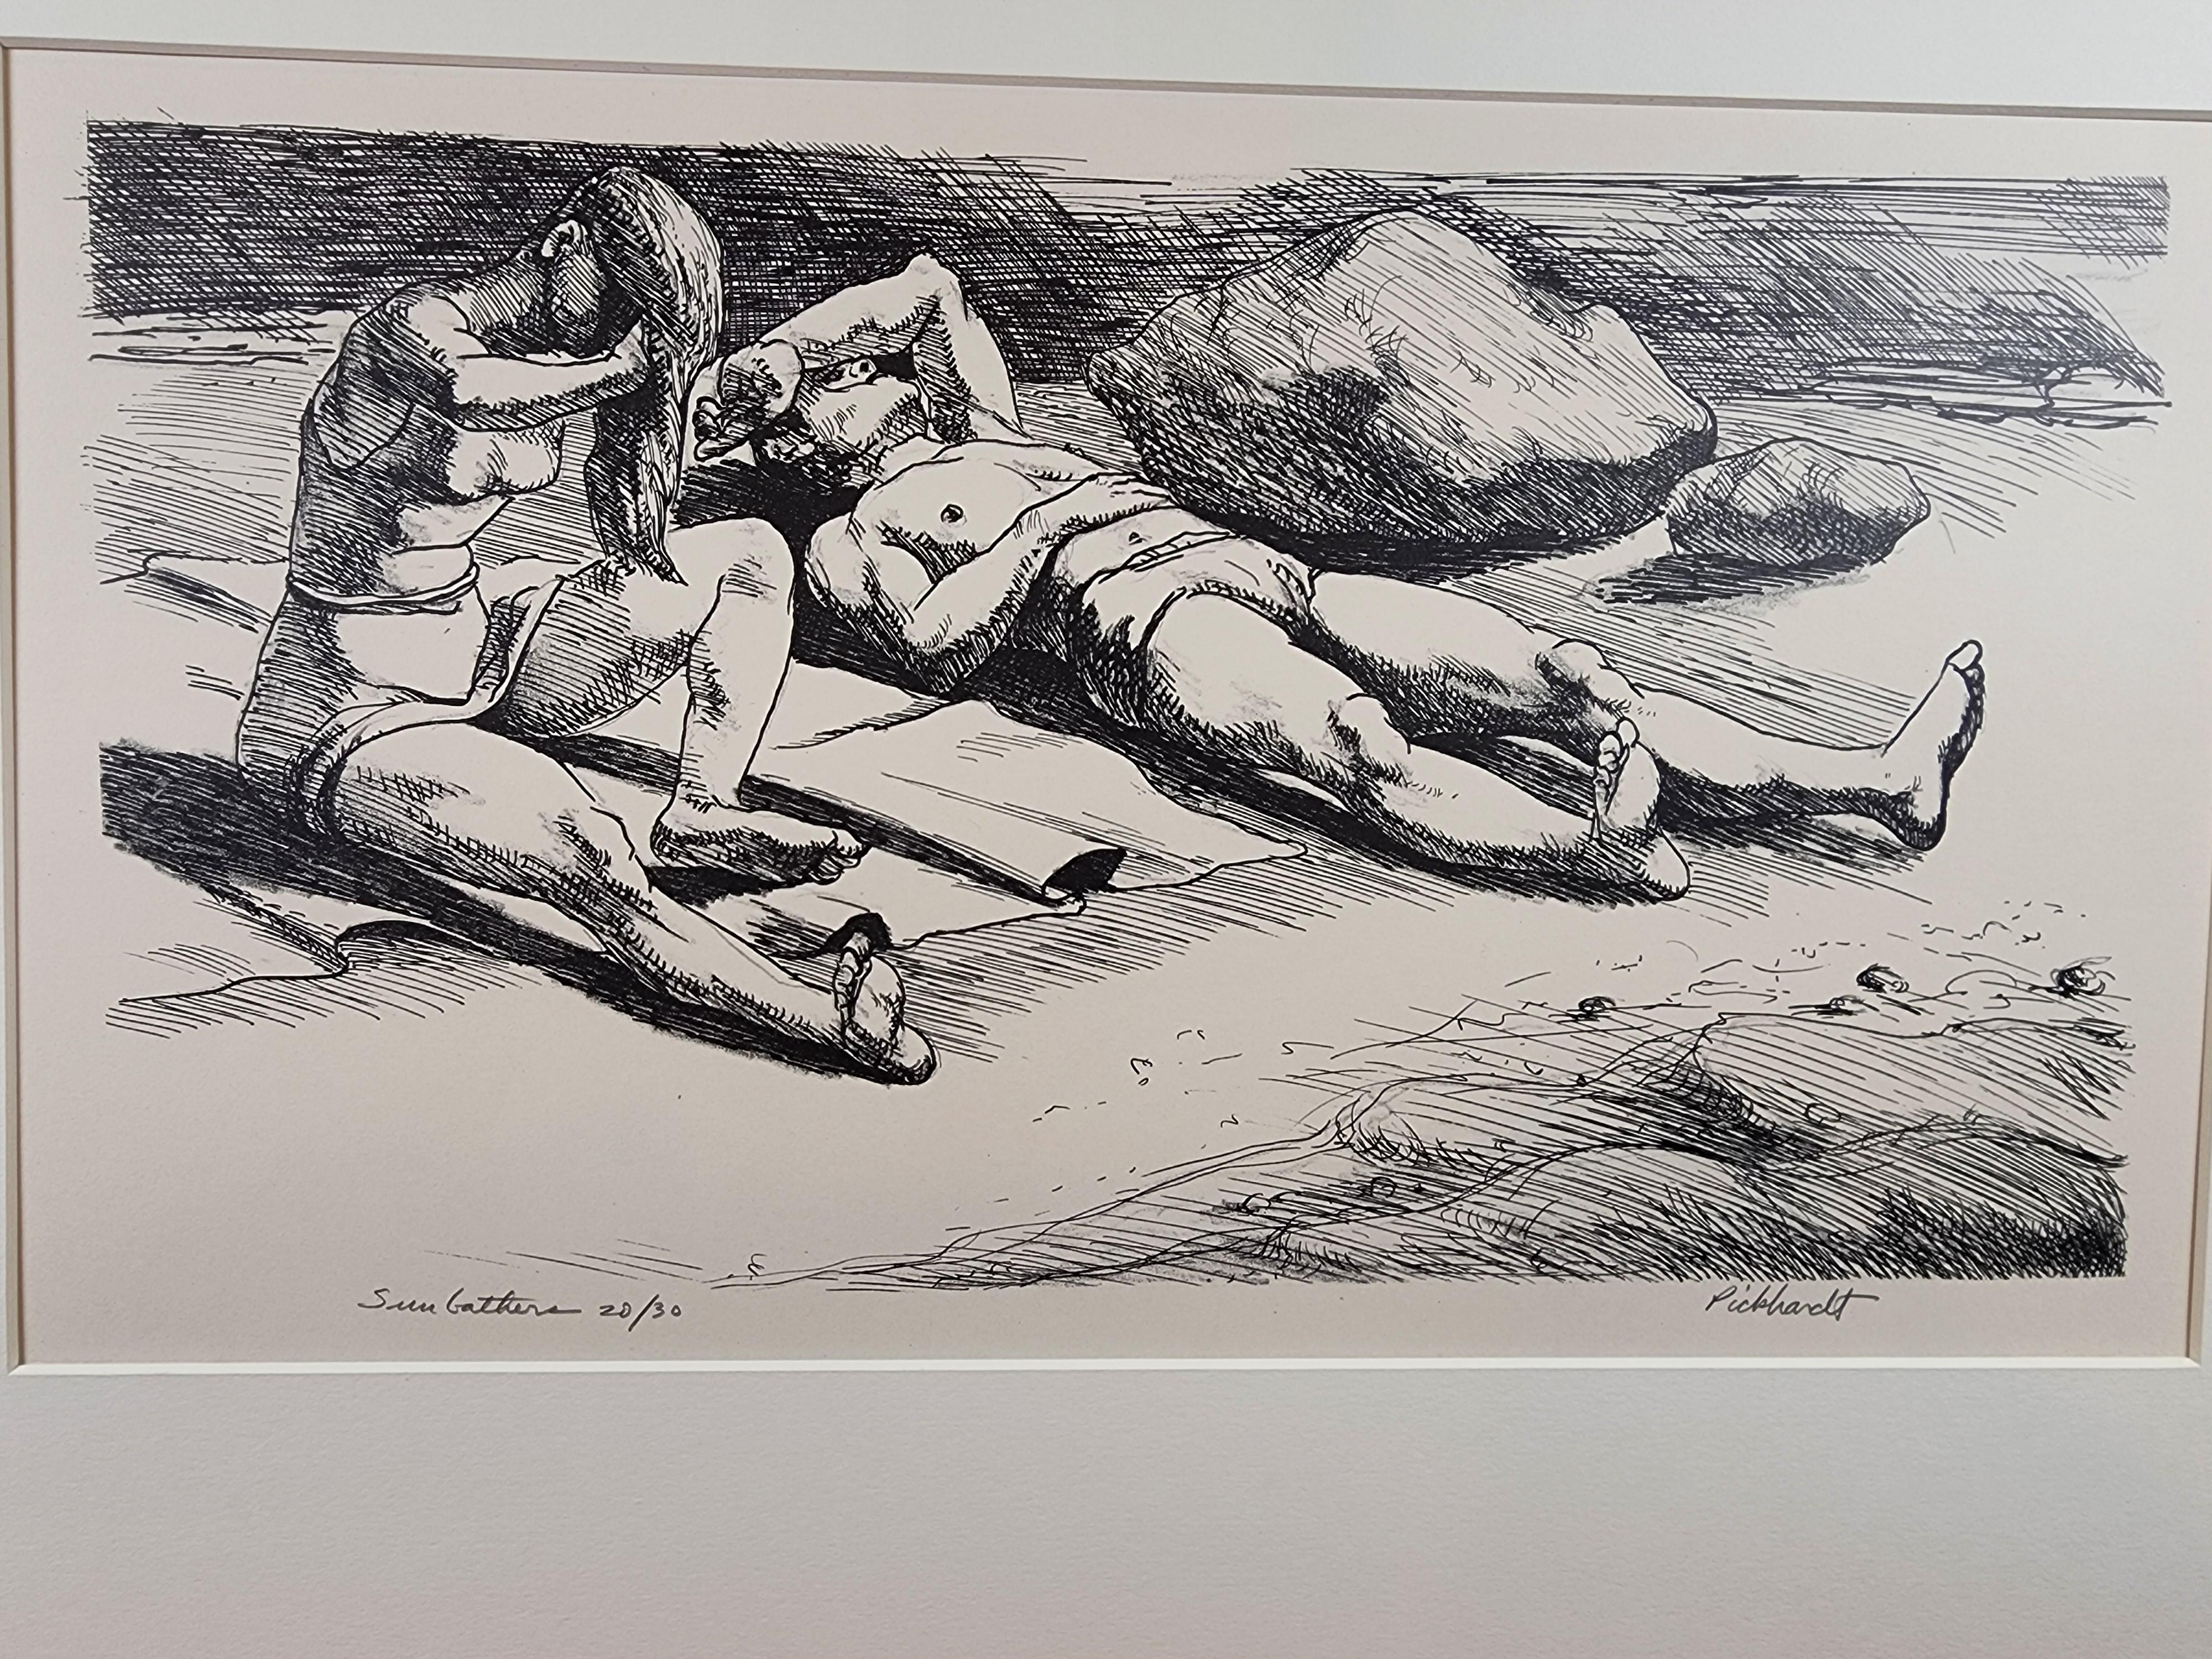 RGRFINEARTS is pleased to offer this fine lithograph of a couple on the beach appropriately titled Sun Bathers